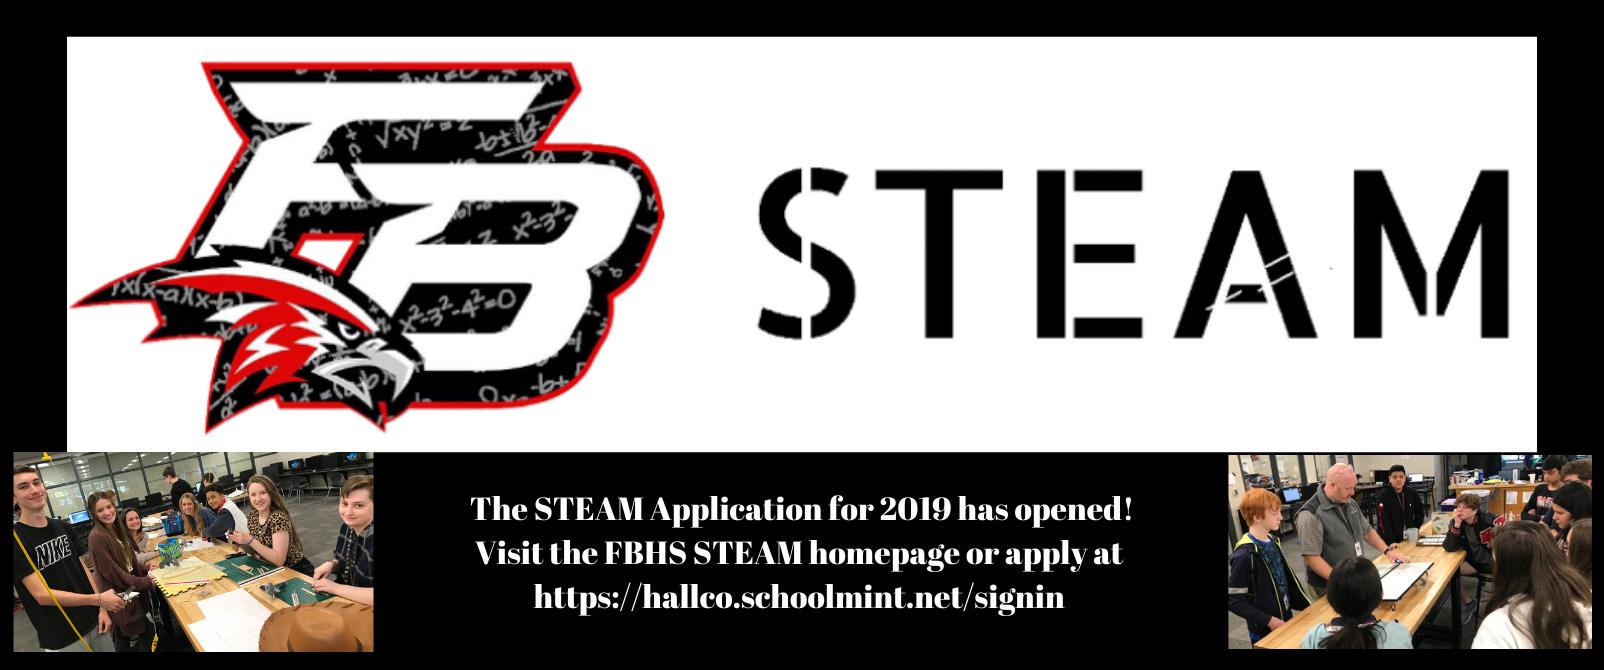 The STEAM Application for 2019